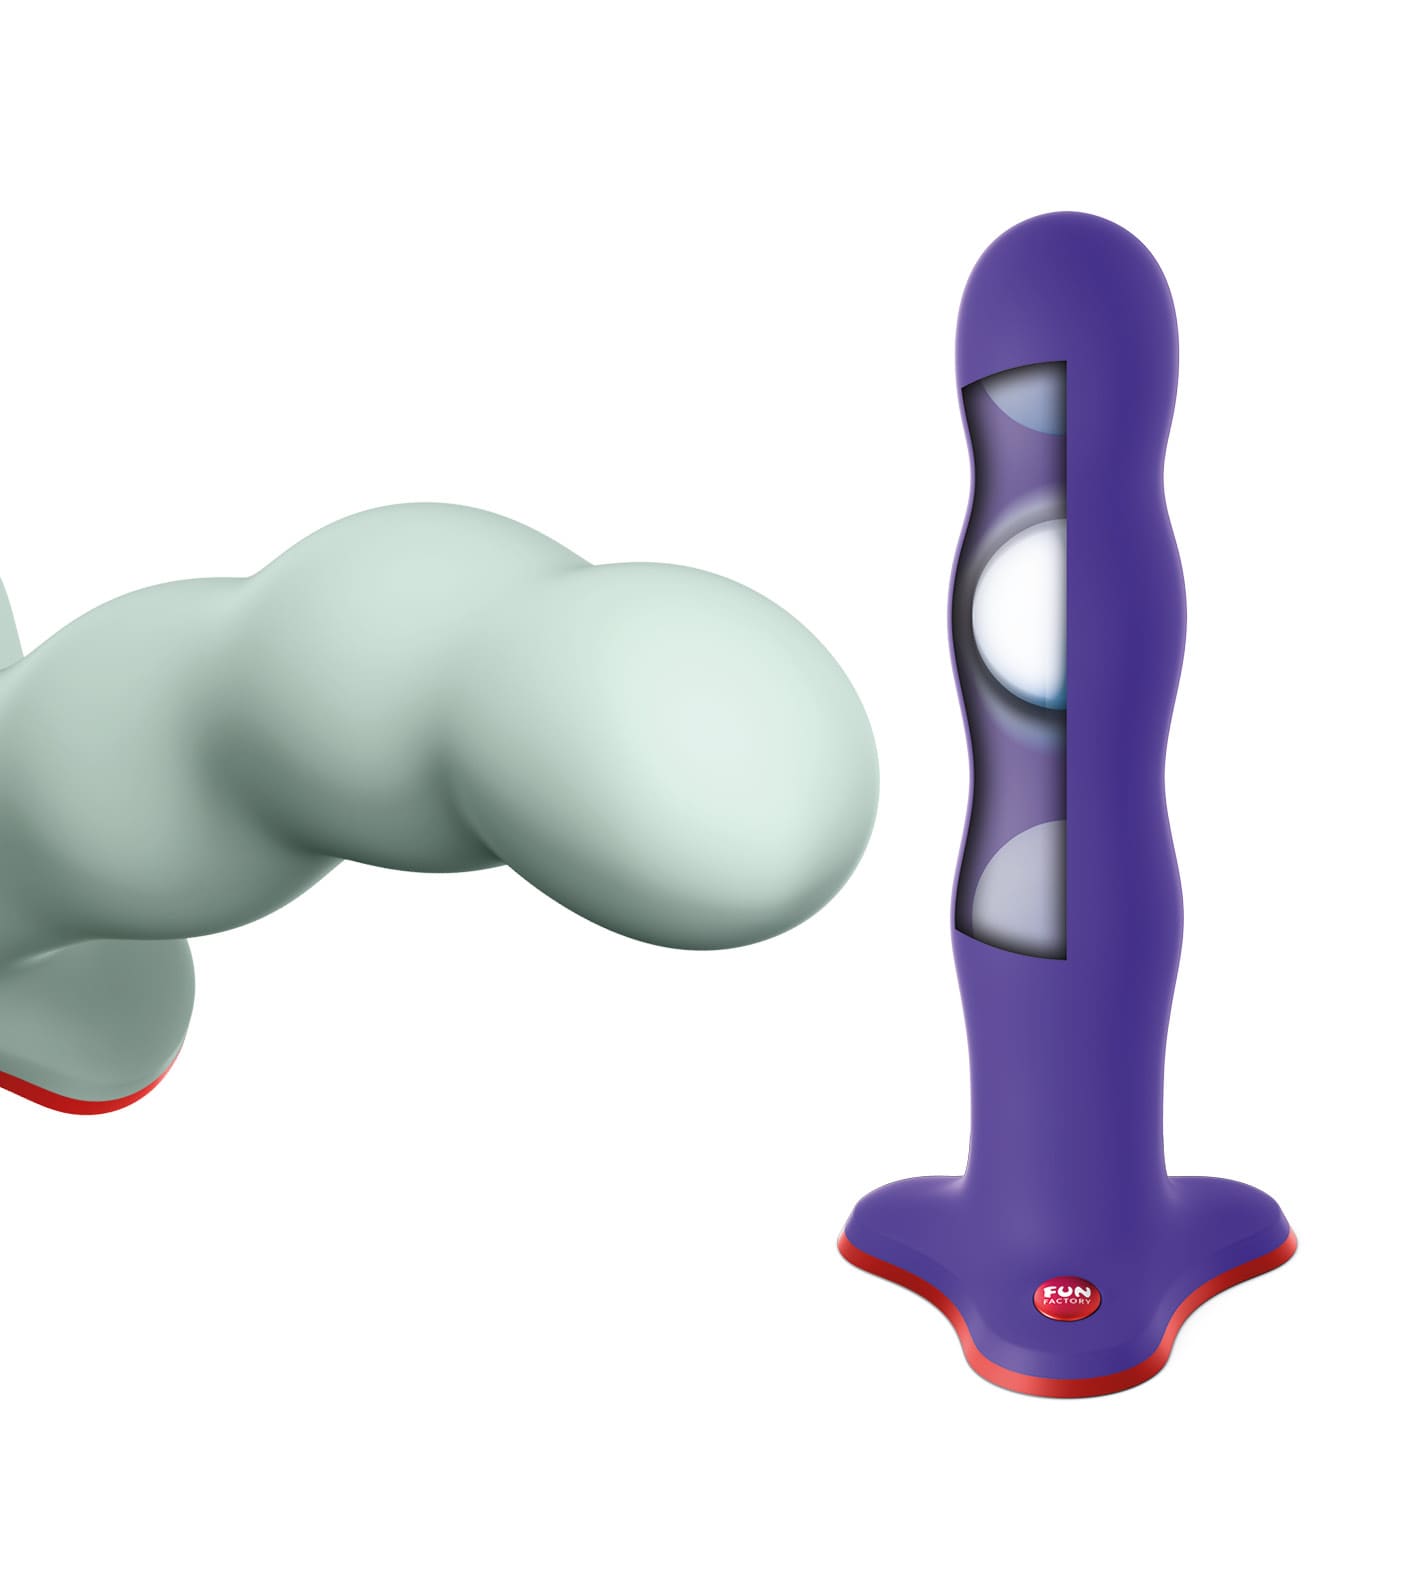 Strap-on dildo BOUNCER – what's behind the design?